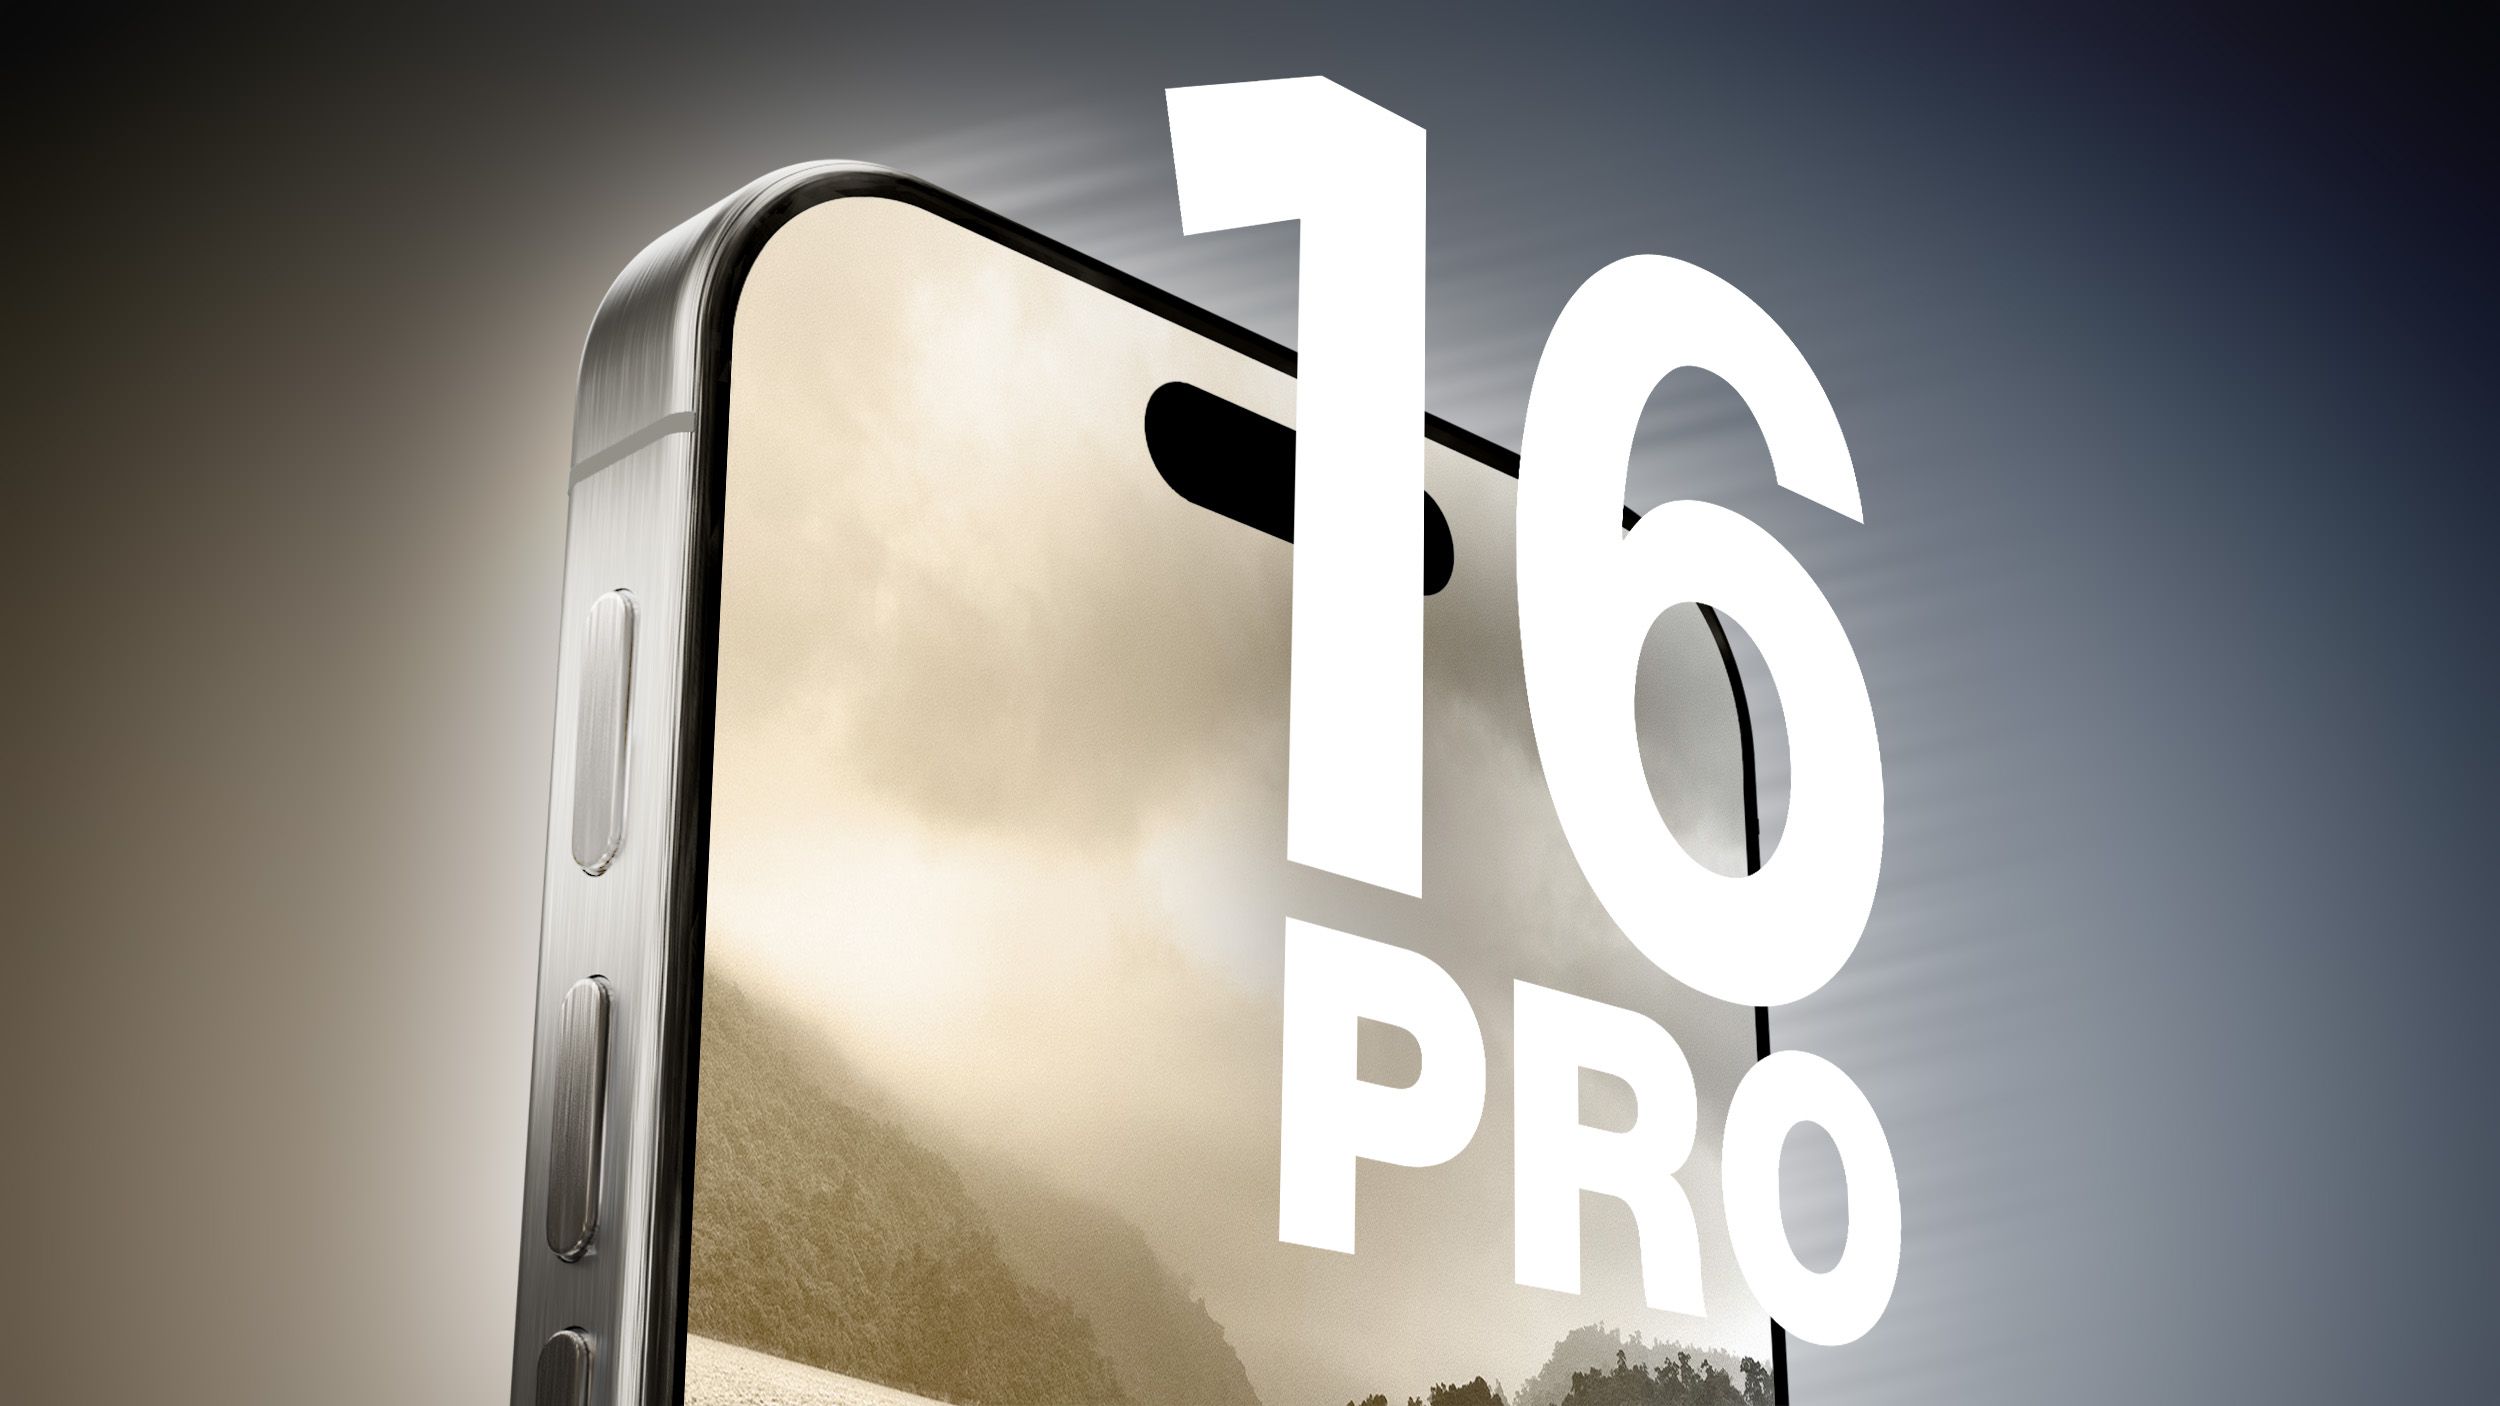 iPhone 16 Pro rumoured to have a 1/1.14-inch main camera sensor